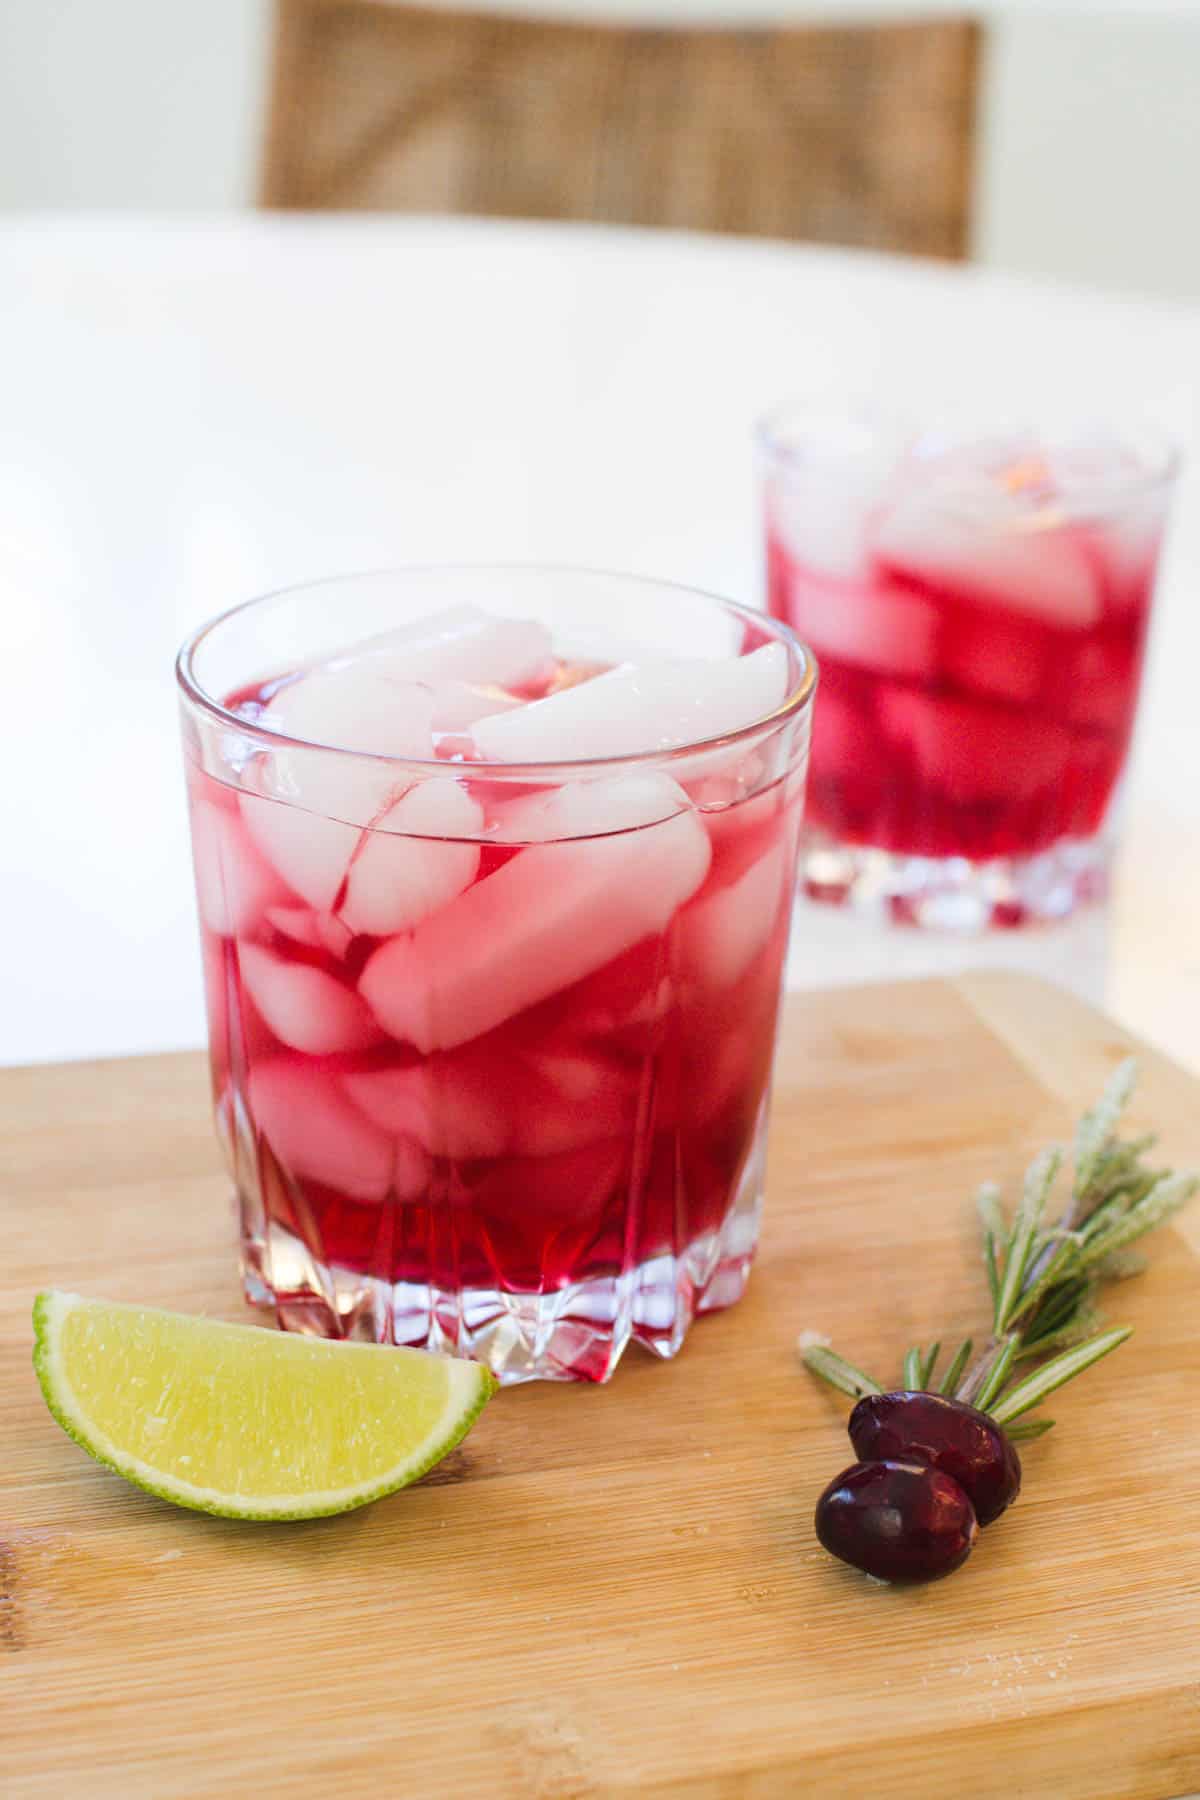 A cocktail glass with cranberry juice and vodka on a tray next to a piece of lime.